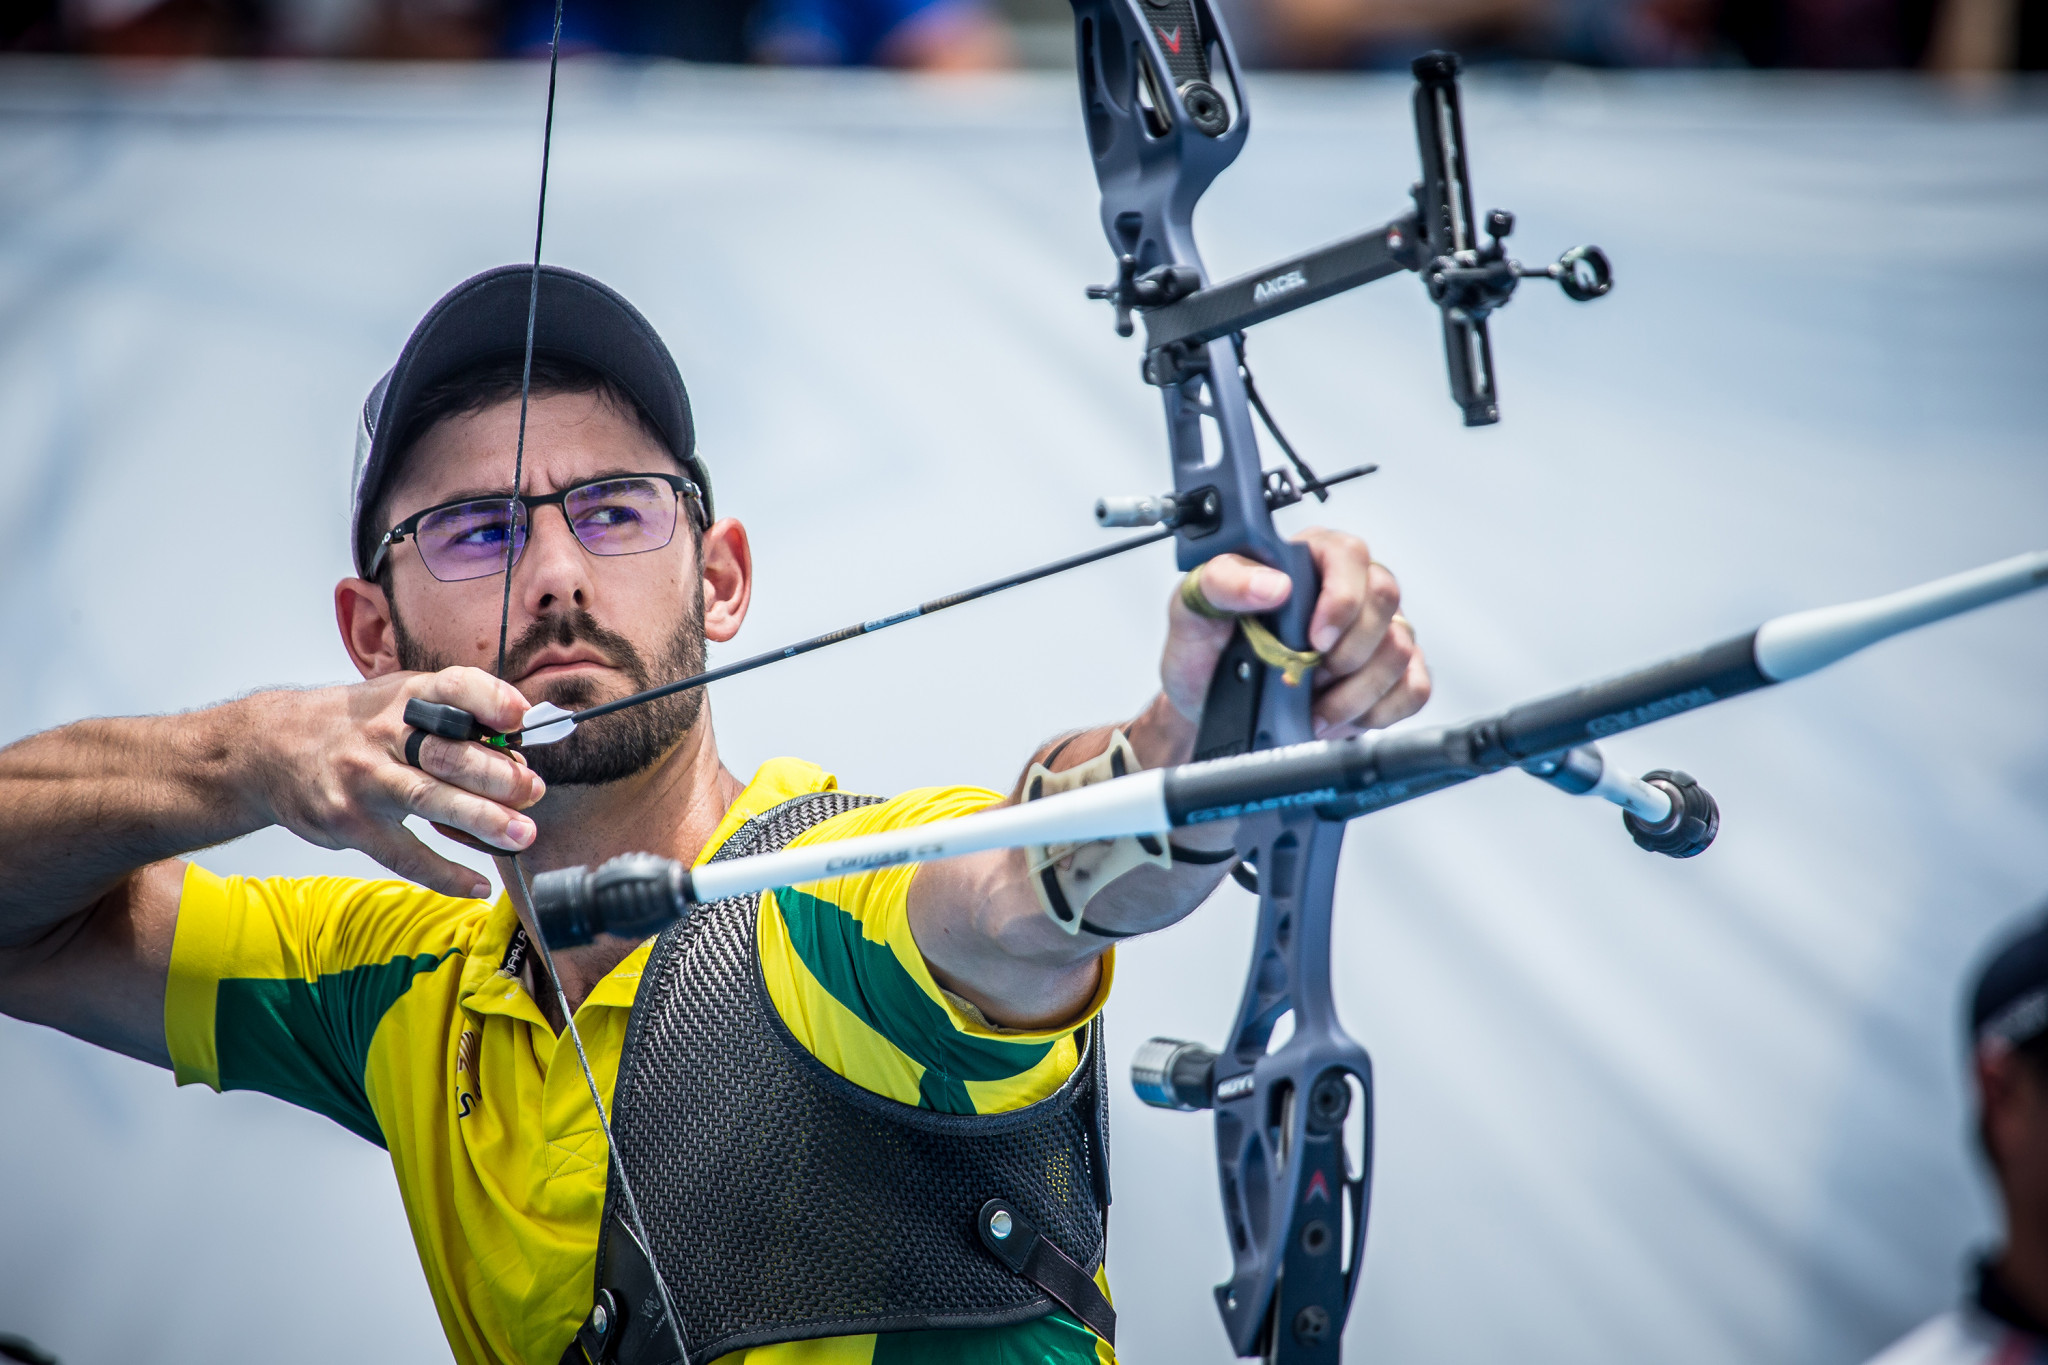 Taylor Worth and his men's recurve archery team mates Ryan Tyack and David Barnes have qualified for Tokyo 2020 following a fifth-place finish at the 2019 Archery World Championships ©Getty Images